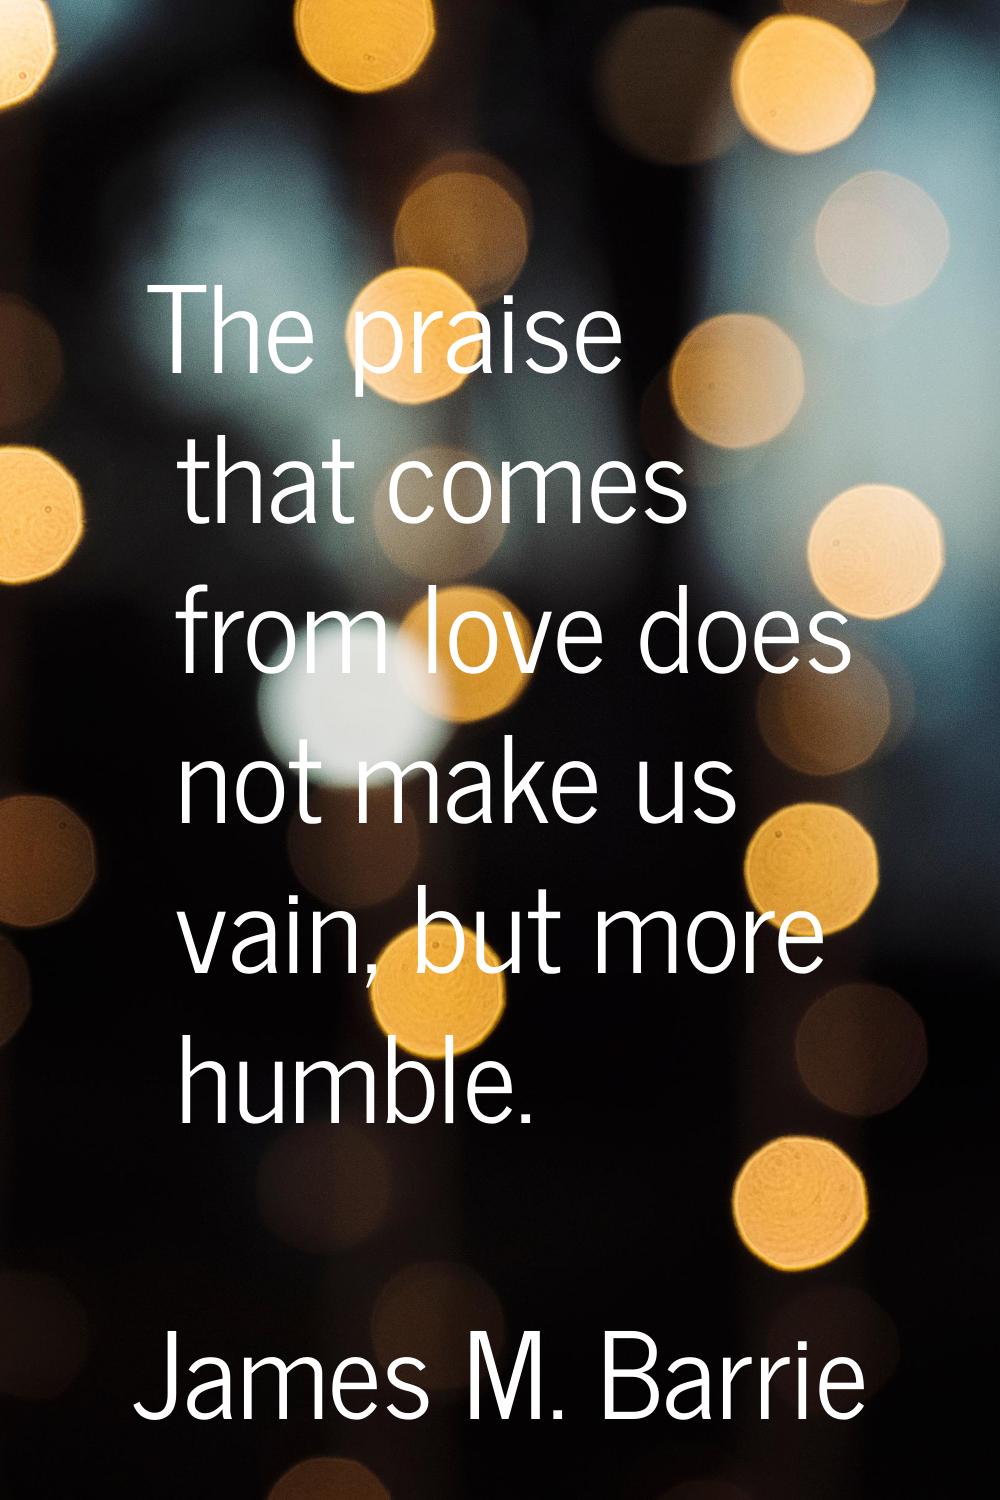 The praise that comes from love does not make us vain, but more humble.